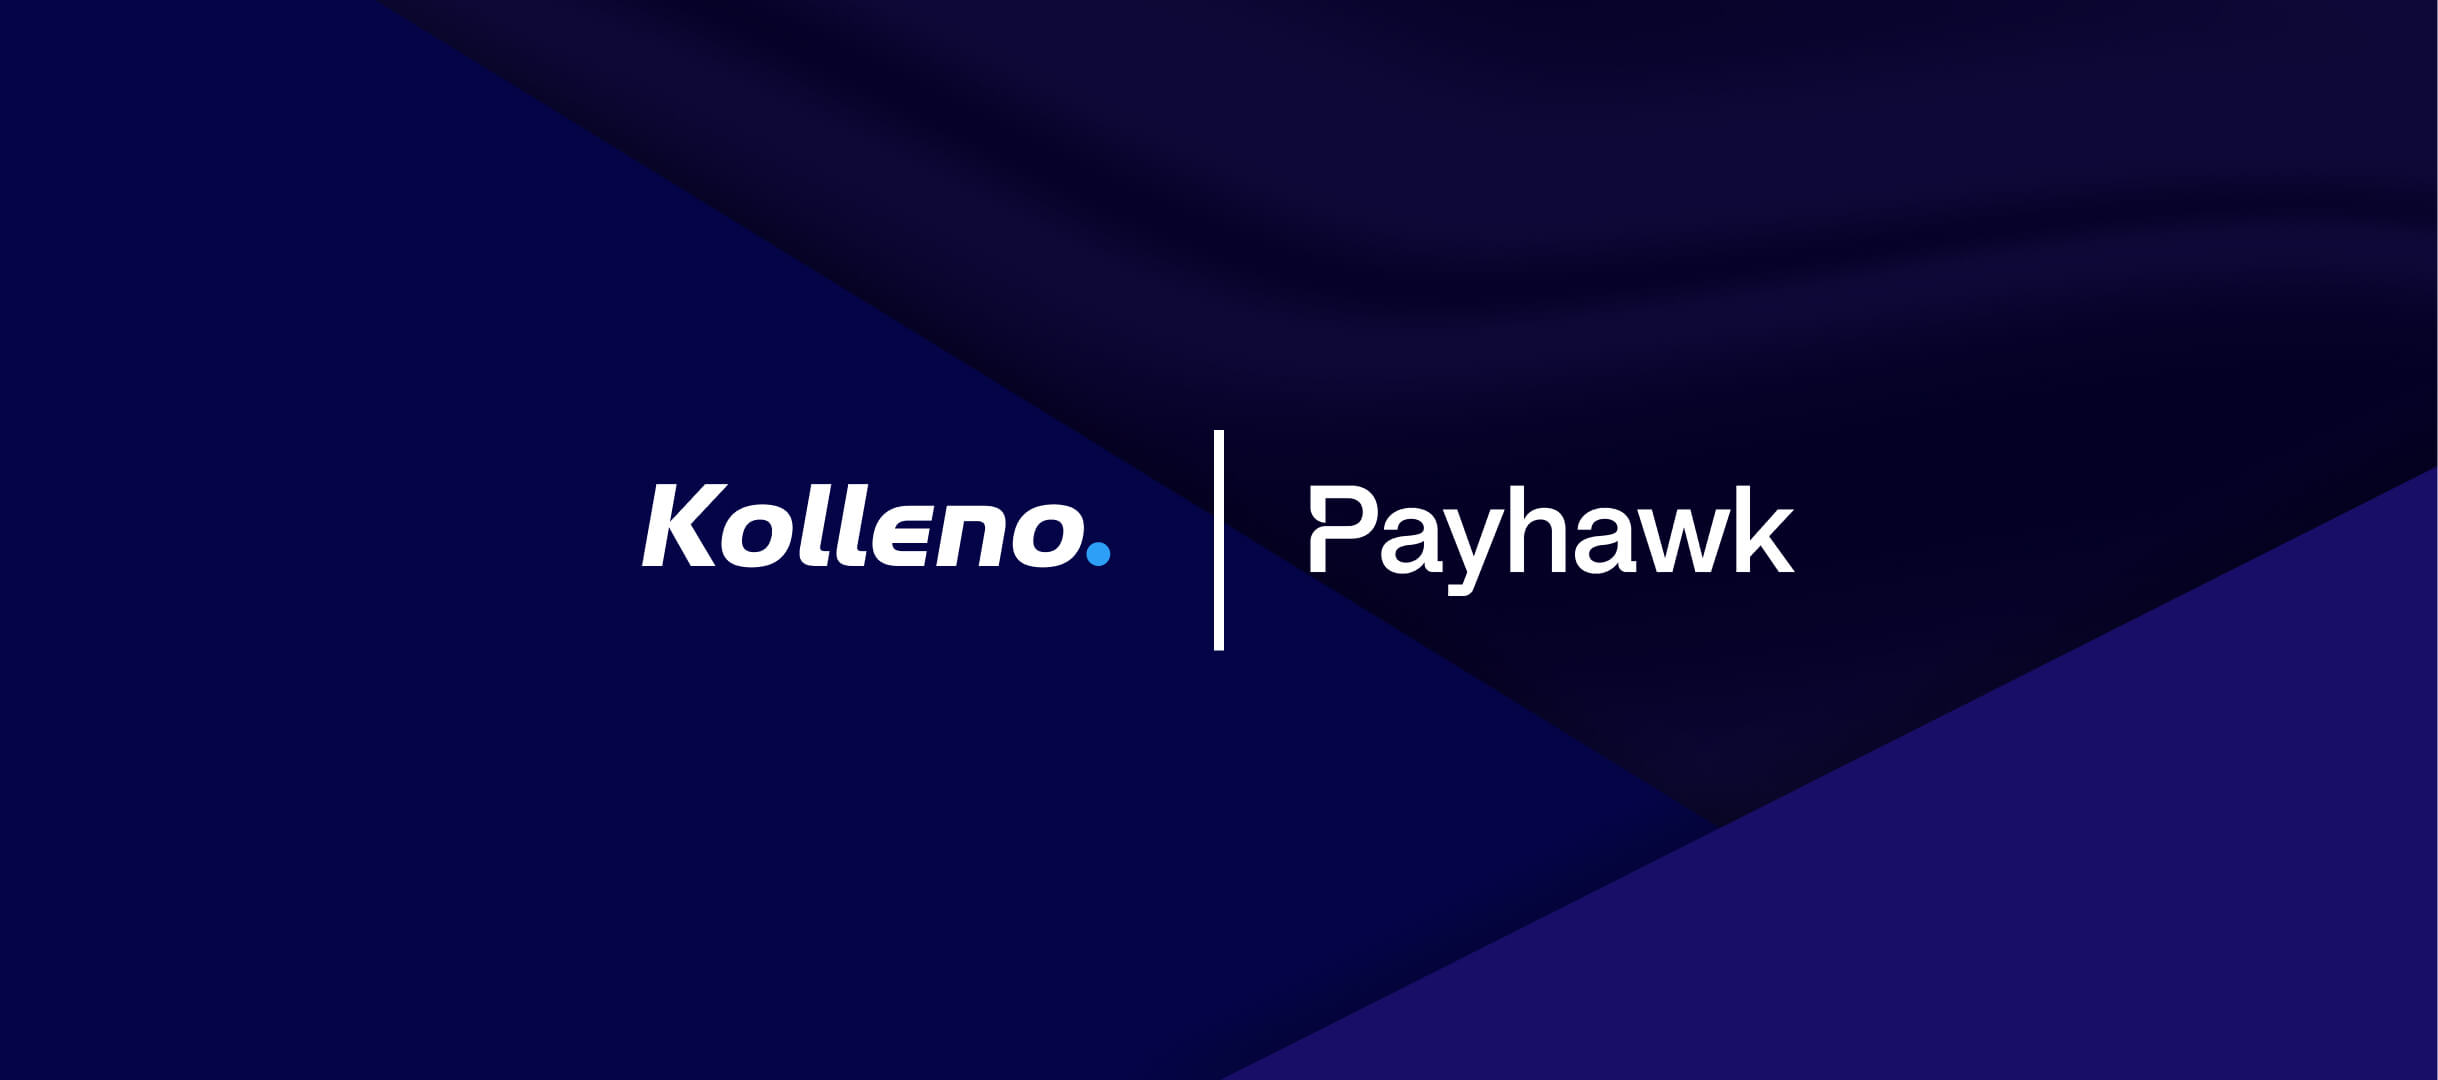 Kolleno partners with Payhawk to improve financial control and visibility